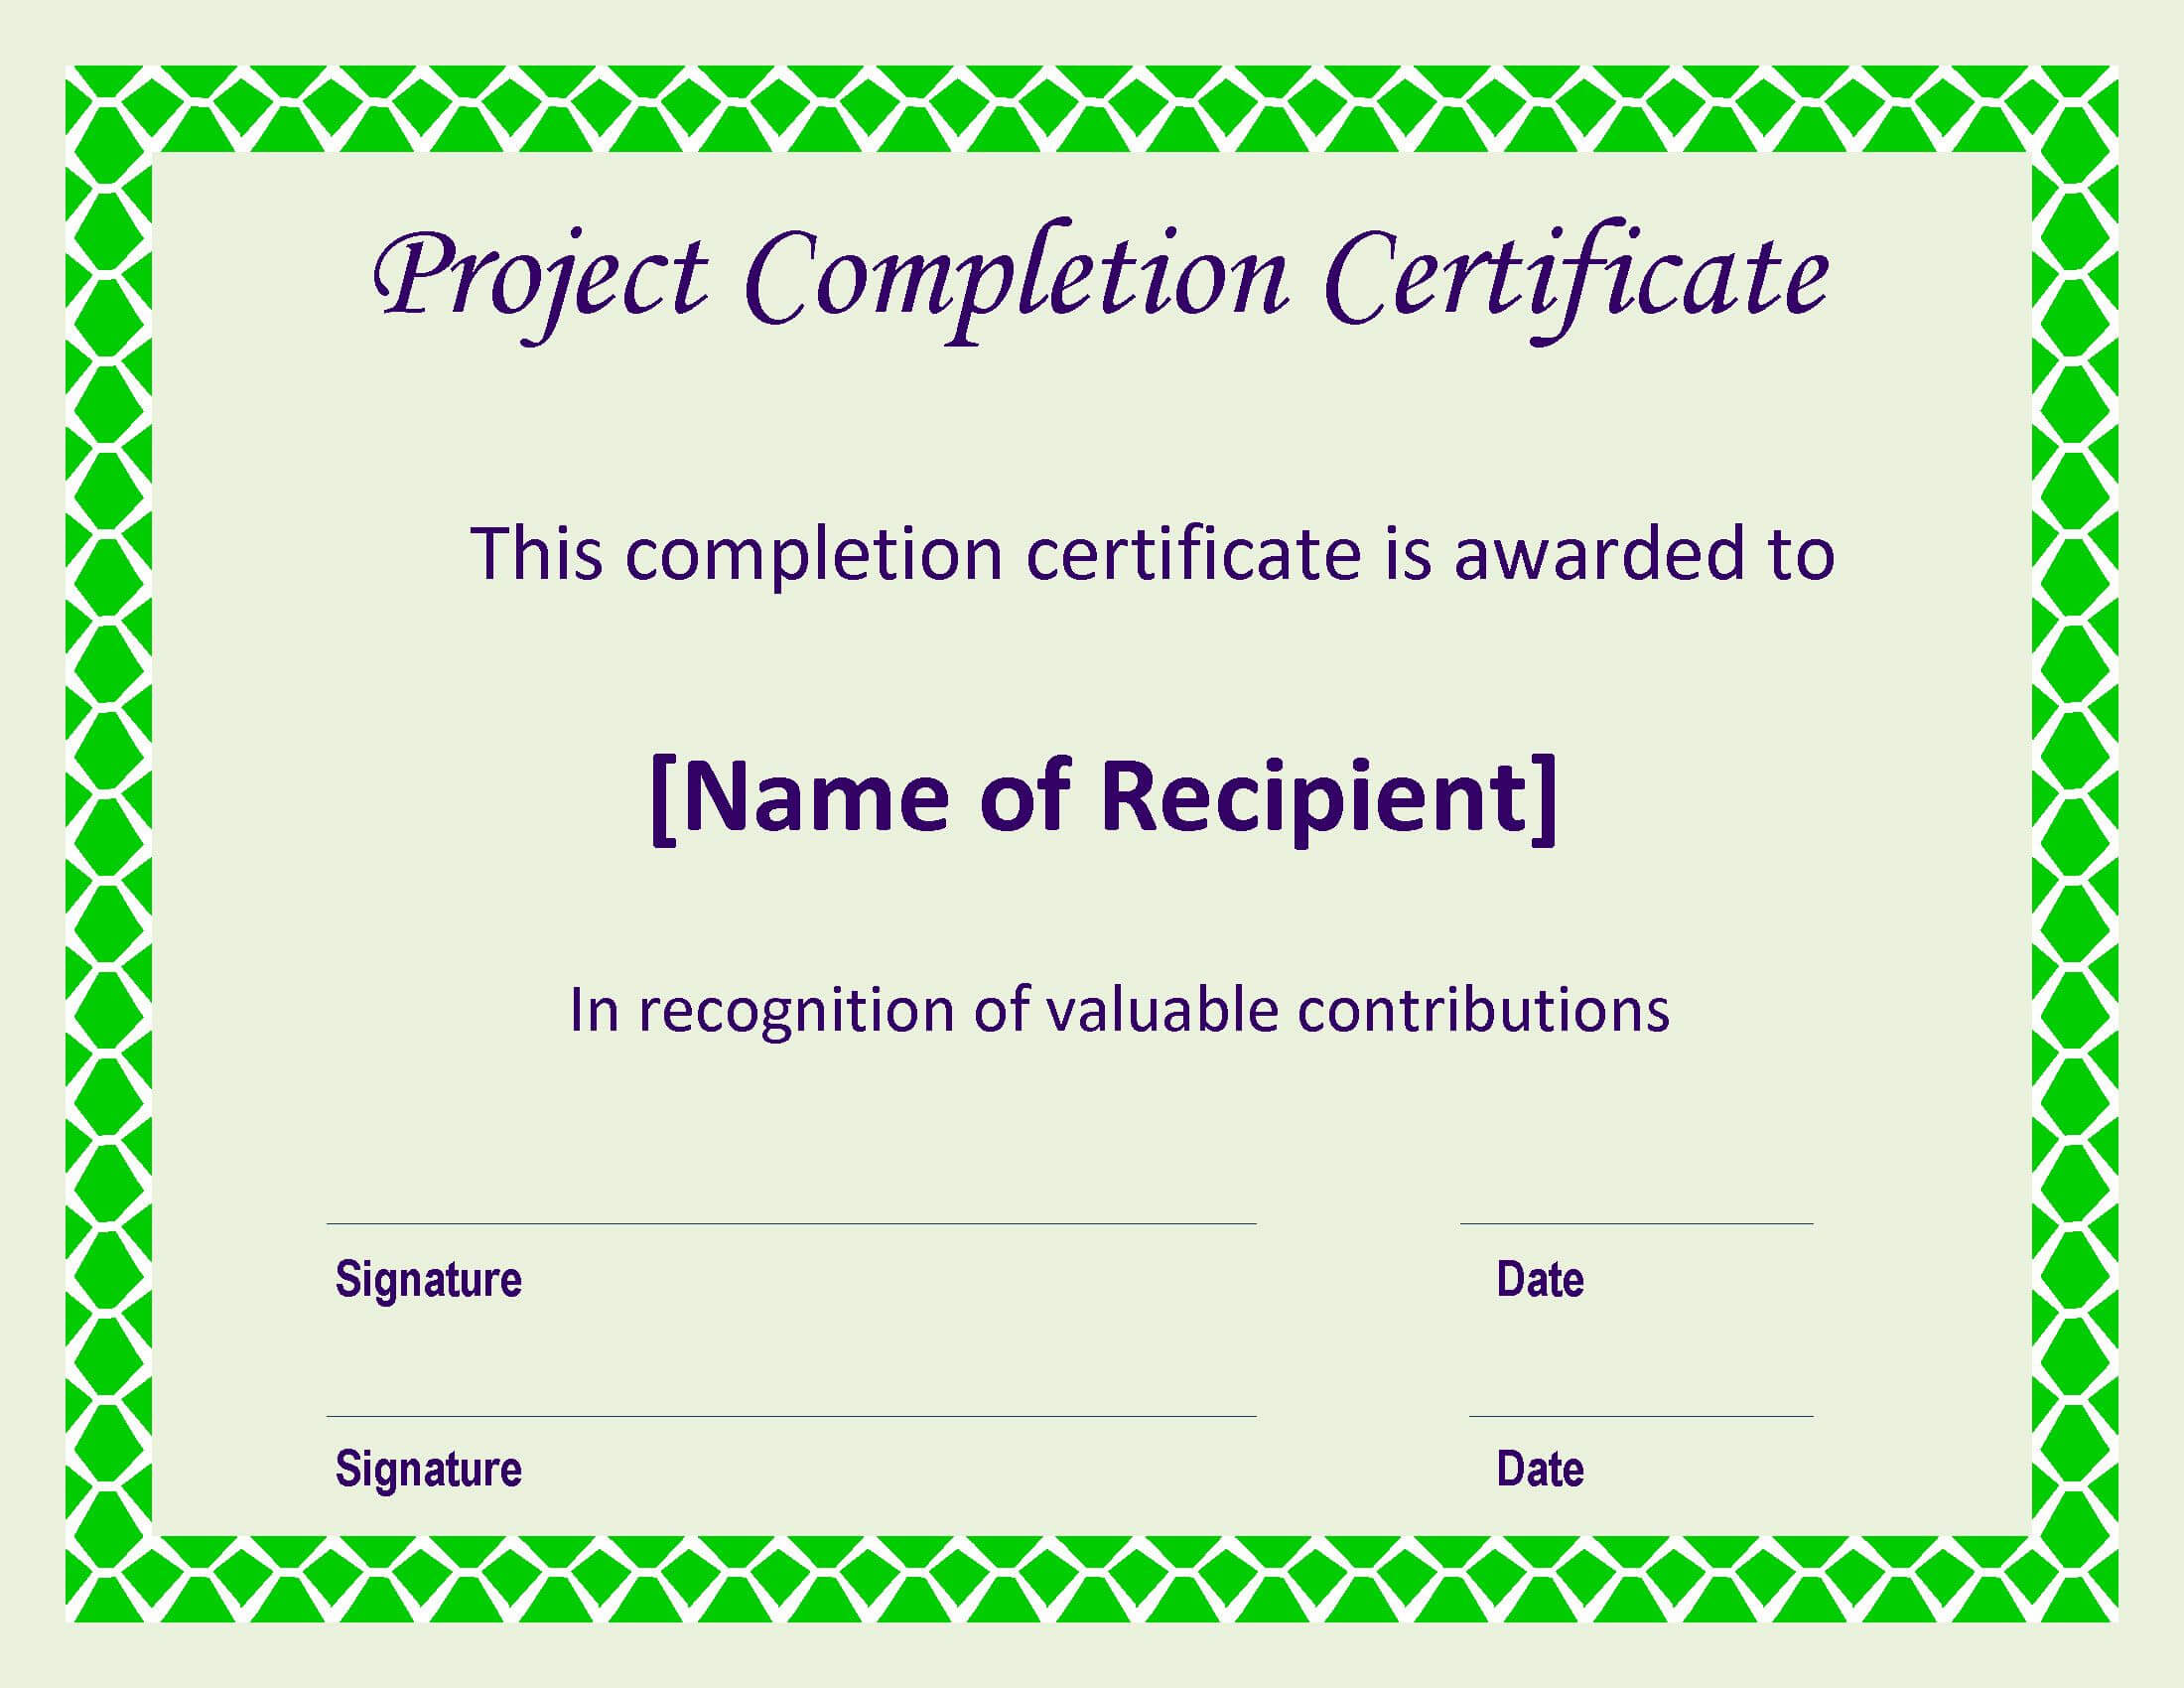 Certificate Of Completion Project | Templates At With Regard To Construction Certificate Of Completion Template